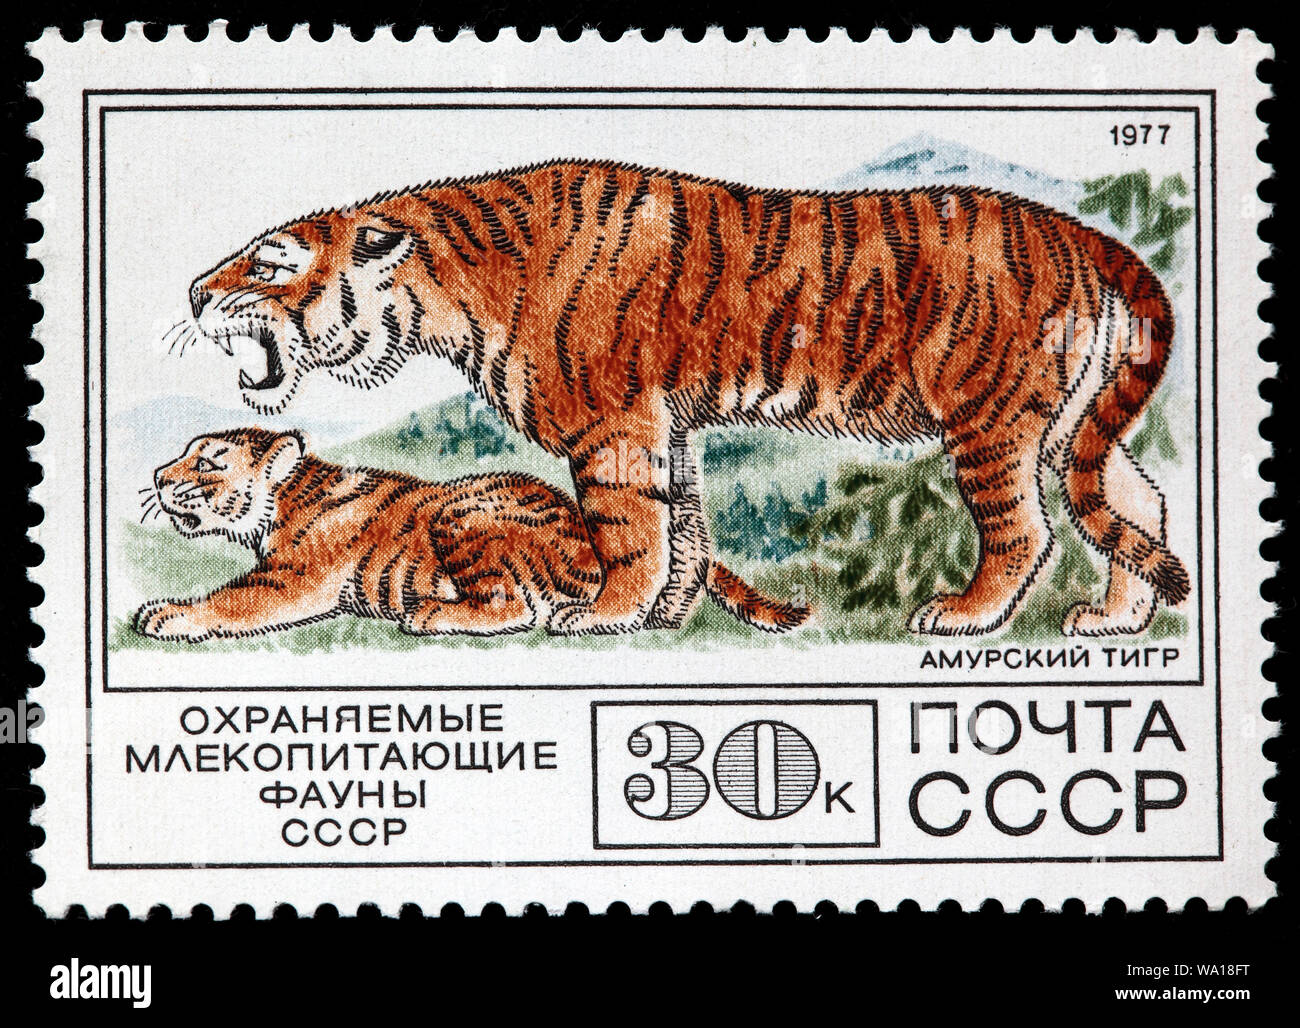 Siberian Tiger, Panthera tigris altaica, postage stamp, Russia, USSR, 1977 Stock Photo